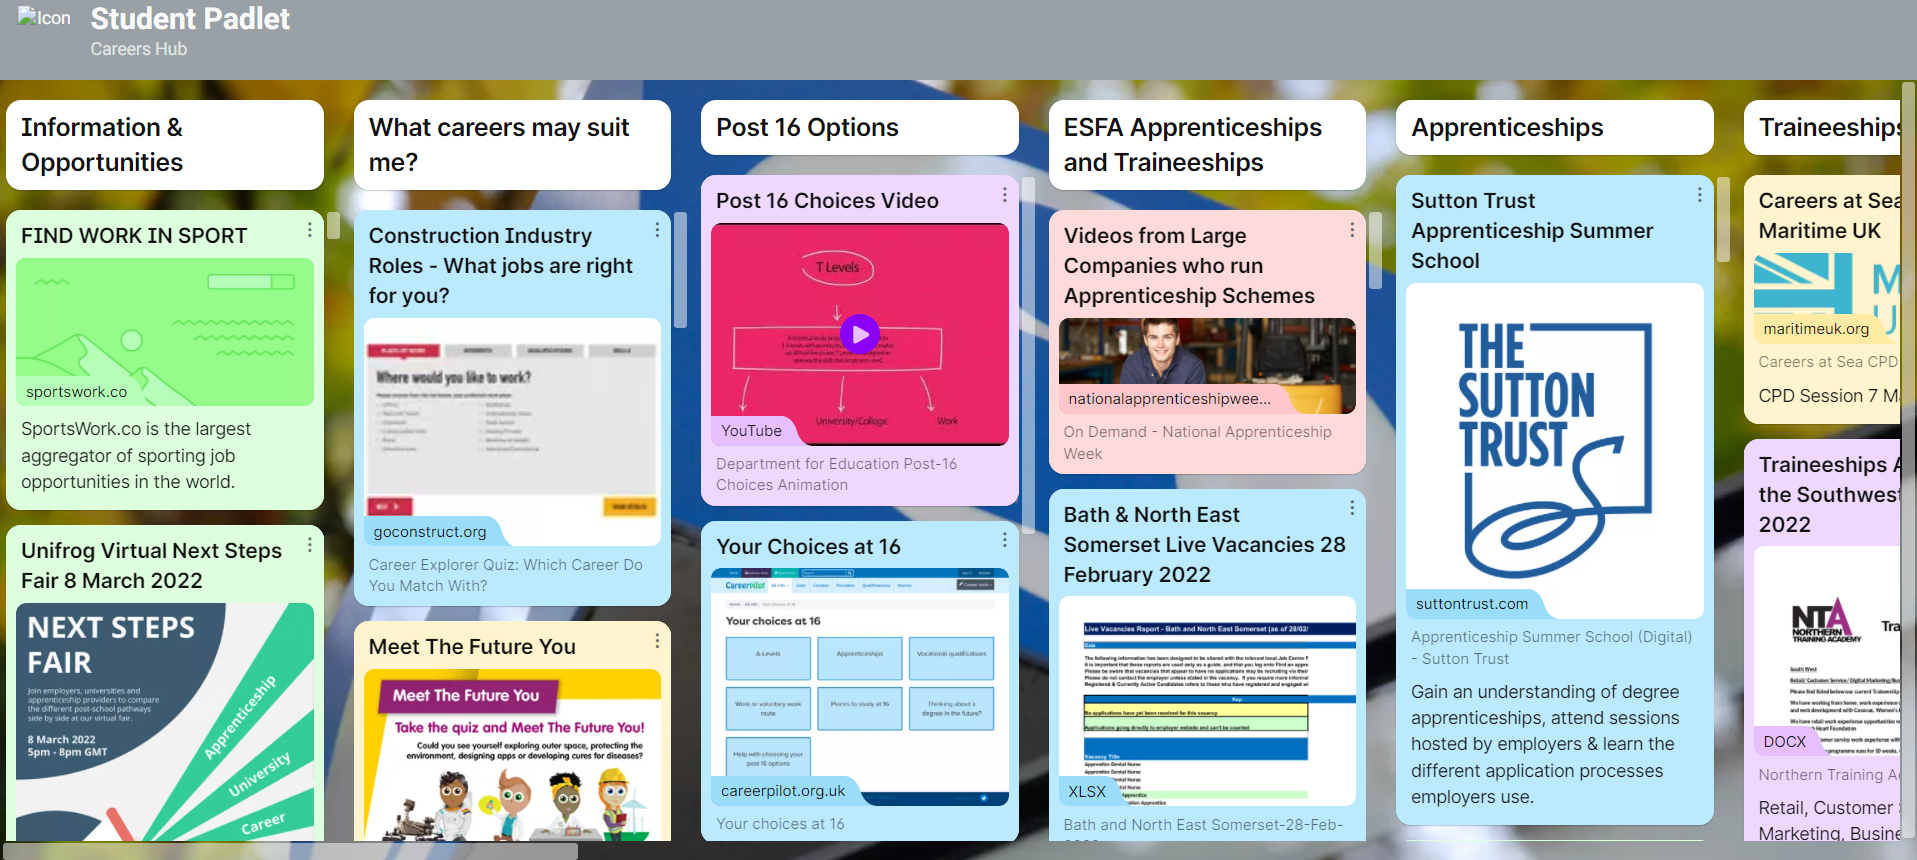 Student Padlet – Careers Resources for Students